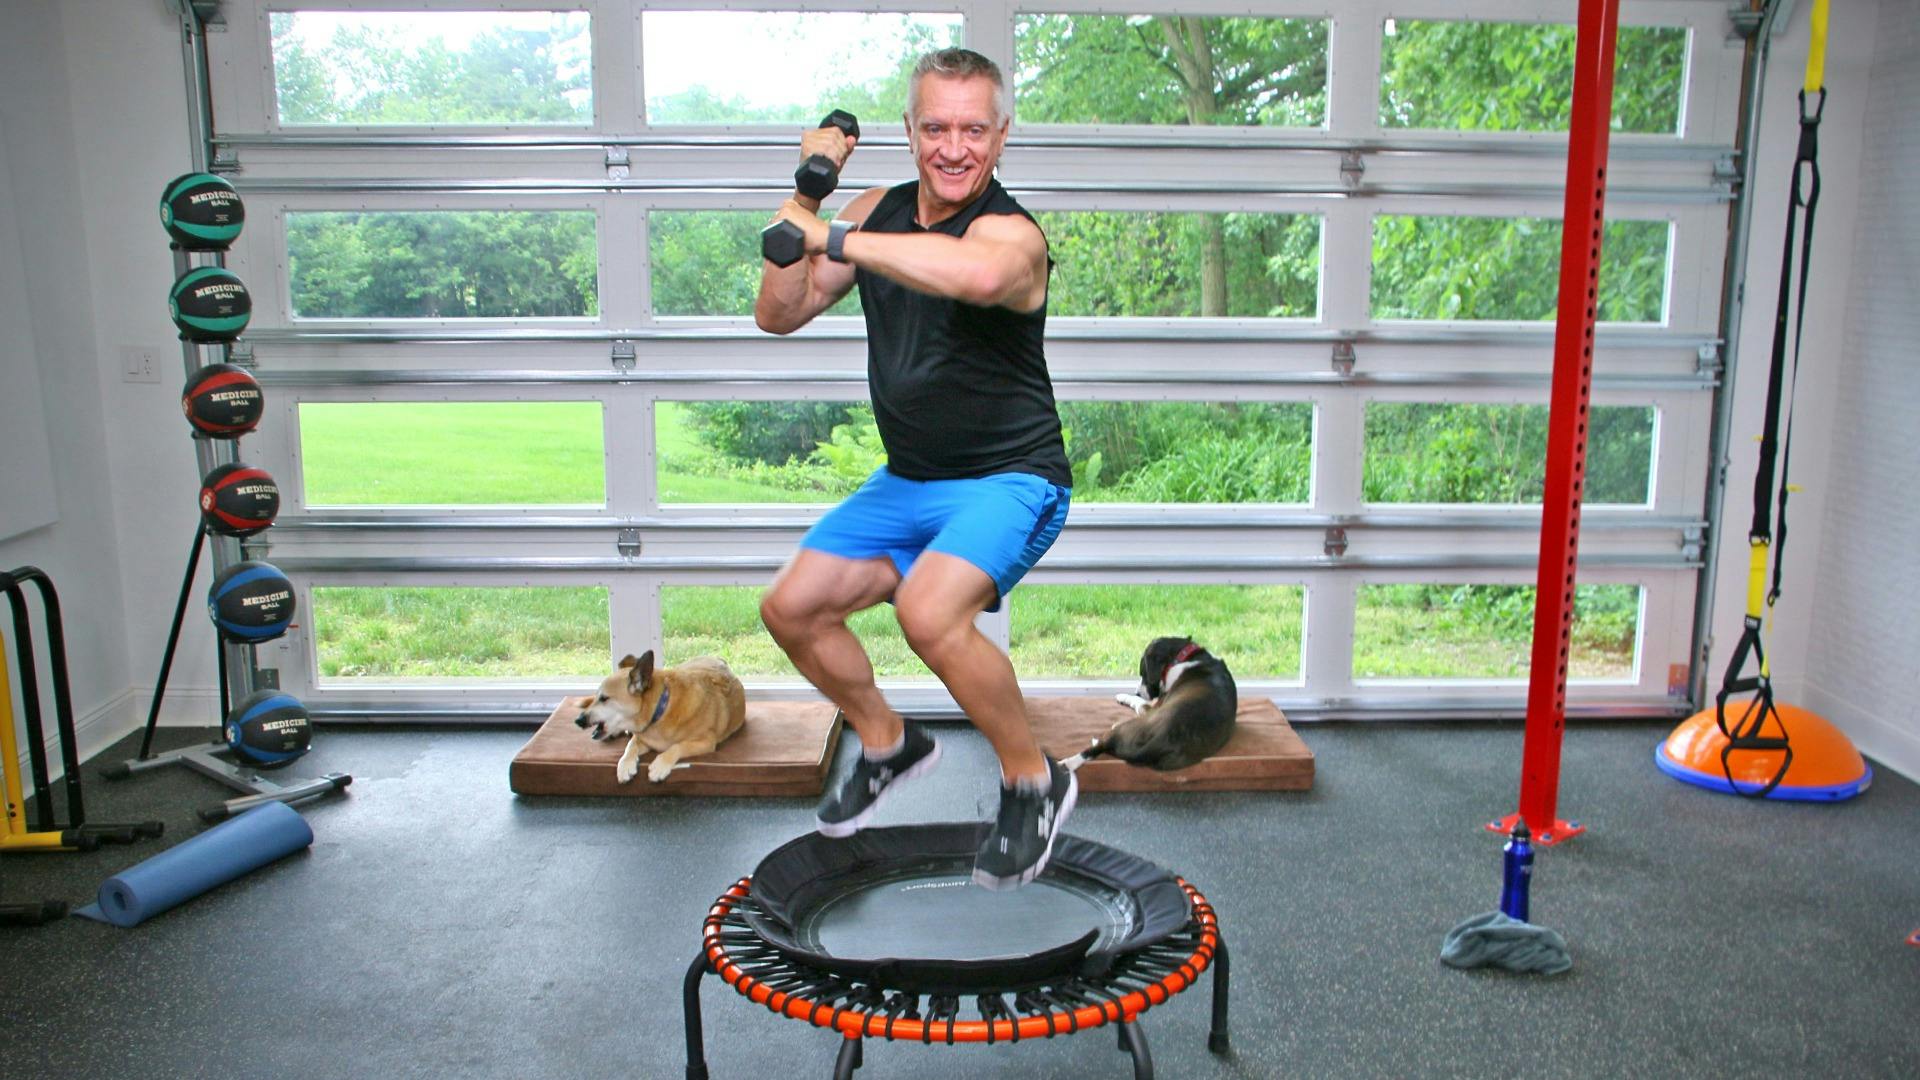 Best Hiit rebounder workouts for Push Pull Legs